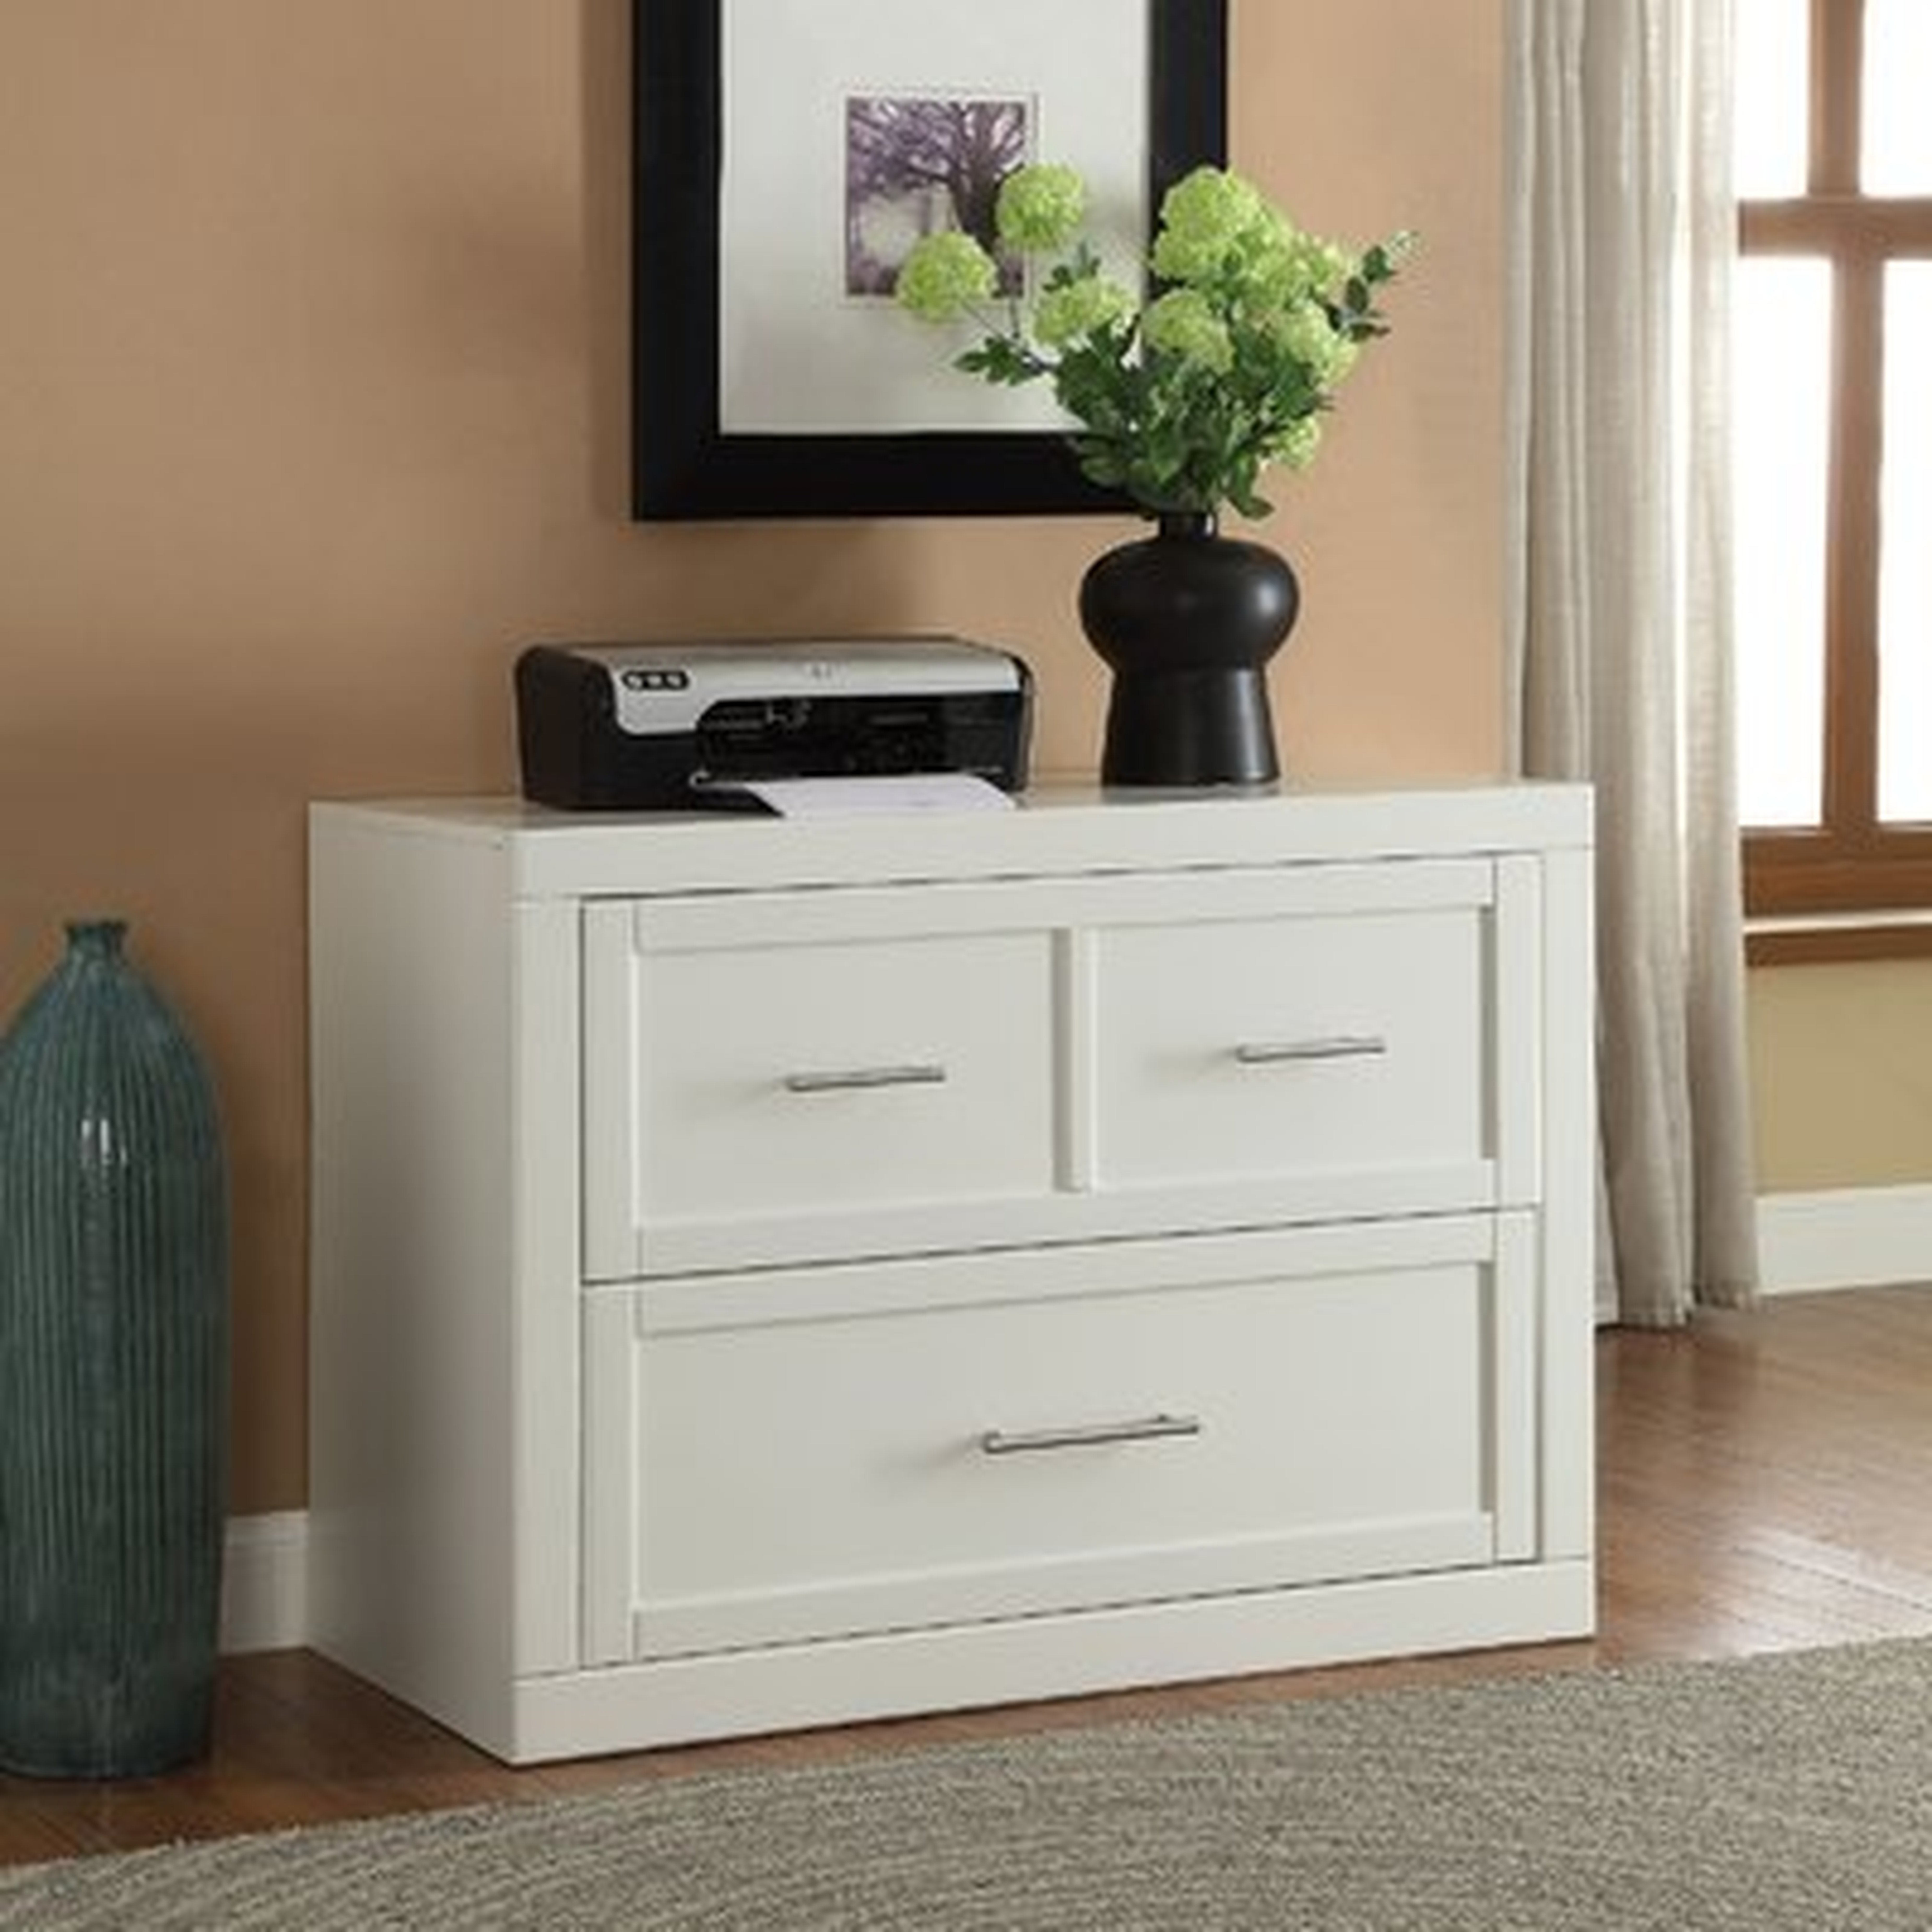 Odonnell 2 Drawer Lateral Filing Cabinet - Birch Lane